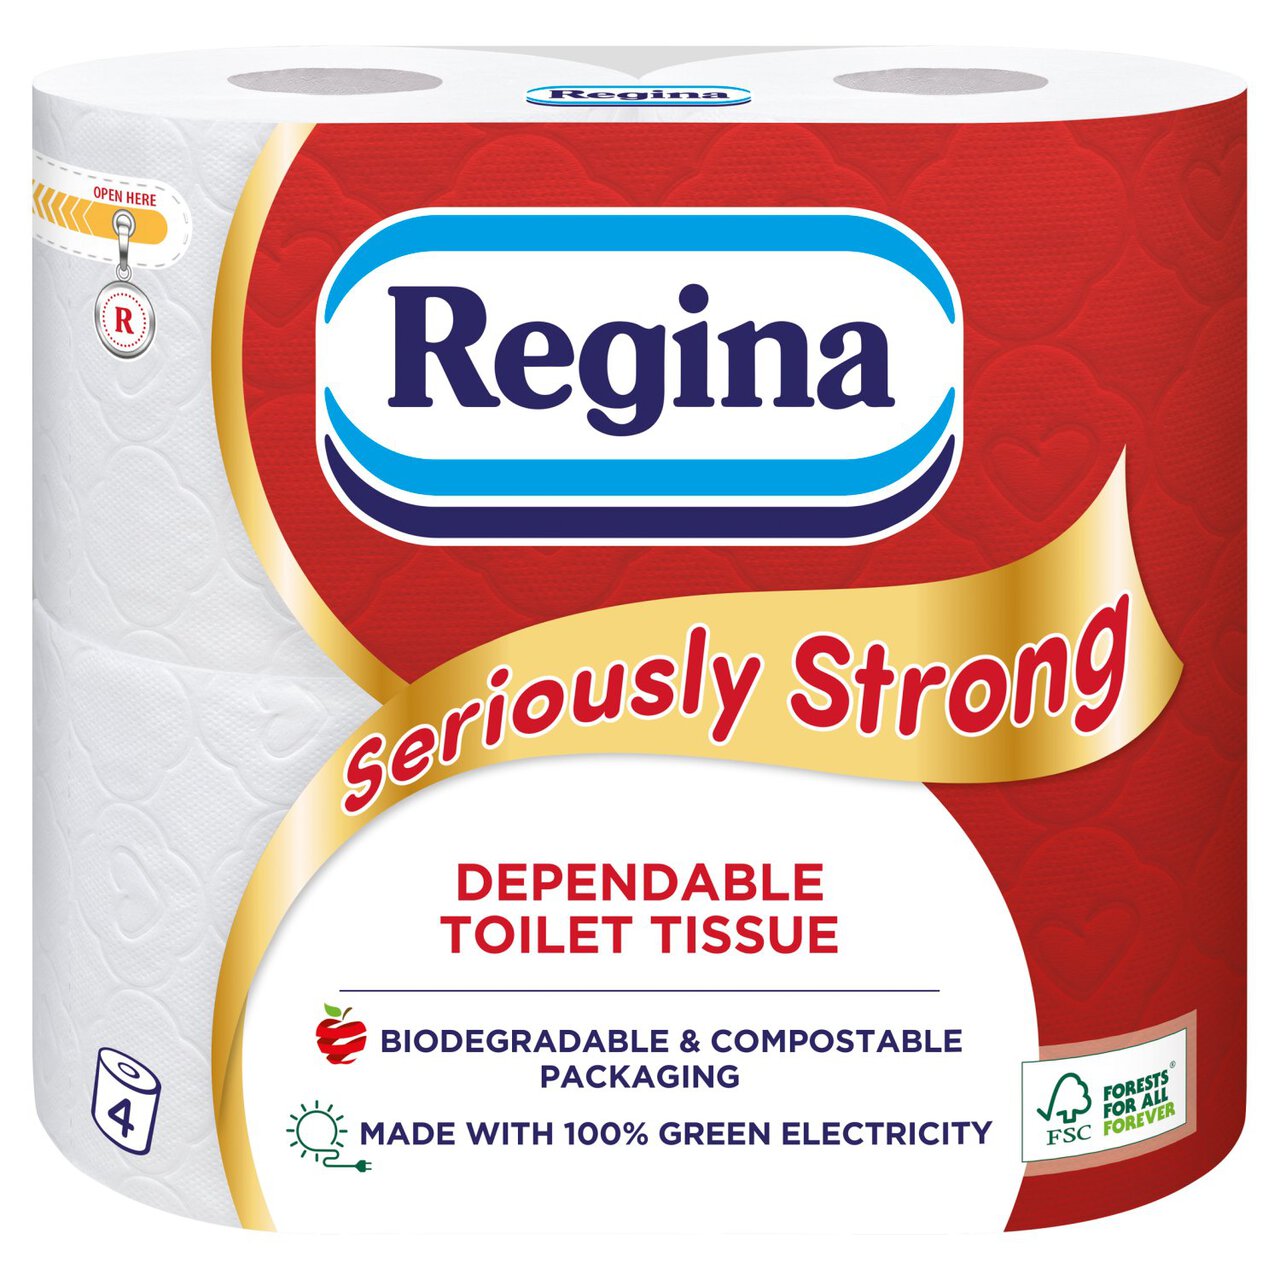 Regina Seriously Strong Toilet Tissue - 4 Rolls 4 per pack